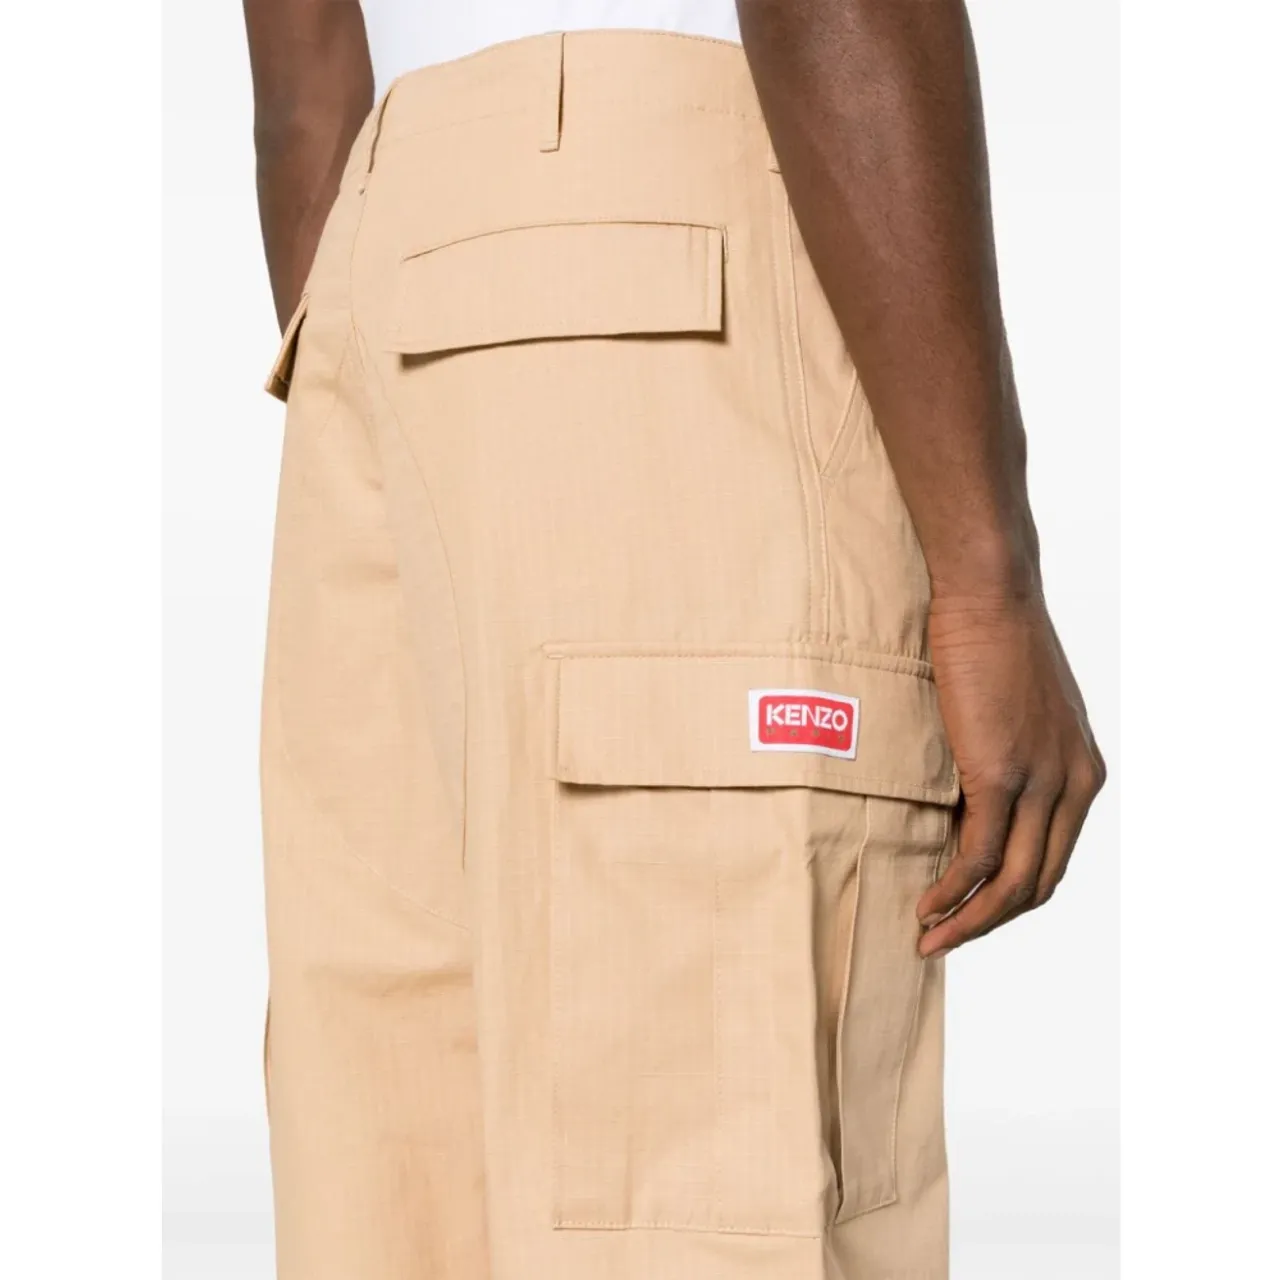 Kenzo , Beige Trousers with Adjustable Drawstrings ,Beige male, Sizes: